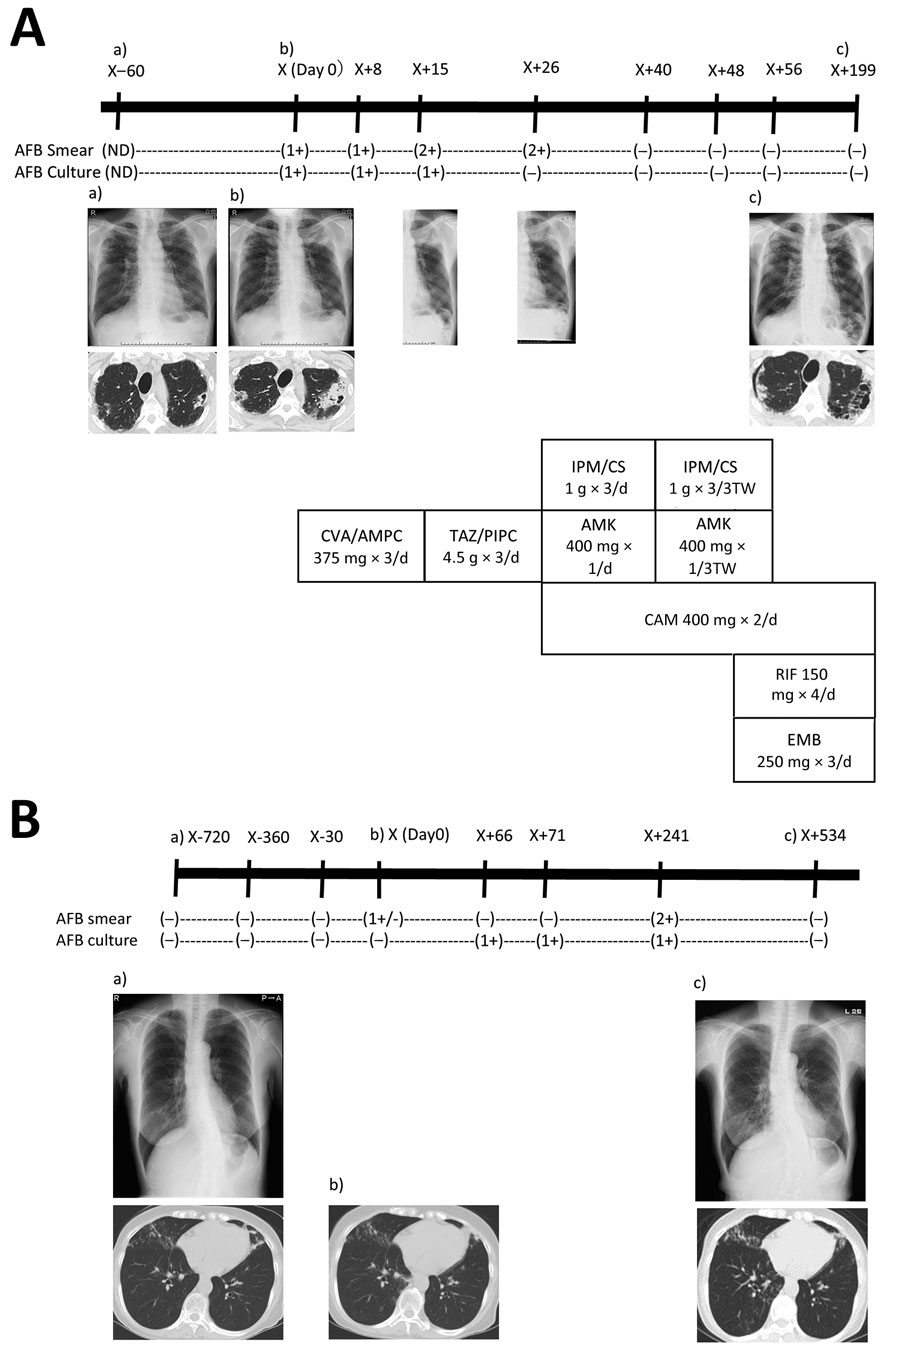 Radiographic and therapeutic drug monitoring for 2 patients with pulmonary disease caused by Mycobacterium shigaense. Each panel shows the timeline at the top (X, initial hospitalization period for M. shigaense disease) with smear results and chest radiograph (top) and chest CT (bottom) images below. The chemotherapy regimen is provided (Appendix). A) Case 1, patient with FC-type disease. a) Chest radiograph shows abnormal nodular shadows and a small calcification in the right upper and middle lung fields on day 60 before initial hospitalization. b) Chest radiograph taken 2 months later showed a more indistinct bilateral contour of the lung; there was increased consolidation of a cavitary lesion in the right upper lobe and a centrilobular nodule with branching in the left upper lobe on transverse chest CT. Lesions including progressive cavities are shown in the right upper and middle lung fields. c) Chest CT shows reduction in cavities and consolidation in the left lobe on day 199. B) Case 2, patient with NB-type disease. a) Chest CT showed a small nodular shadow in the right lower lung field. Image showed bronchiectasis in the left middle lobe and the lingular segment of the right upper lobe. There was peribronchiectasic consolidation and multiple small nodules suggesting bronchiolitis in both lungs. b) After 24 months, chest CT showed a stable extent of scattered small nodules including bronchiectasis just beneath the pleura and pleural thickening in the right middle lobe. c) Chest CT showed bronchiectasis in the right middle lobe. According to the number of AFB seen by Ziehl-Neelsen method for acid-fast staining, smear results were classified as 3+, 2+, 1+, or ±. –, negative; +, positive. AFB, acid-fast bacilli; AFB culture result –, culture negative; +, culture positive. AMK, amikacin; CAM, clarithromycin; CVA/AMPC, clavulanic acid/amoxicillin; CT, computed tomography; EMB, ethambutol; FC, fibrocavitary; IPM/CS, imipenem/cilastatin; NB, nodular bronchiectasis; ND, no data; RIF, rifampin; TAZ/PIPC, tazobactam/piperacillin.